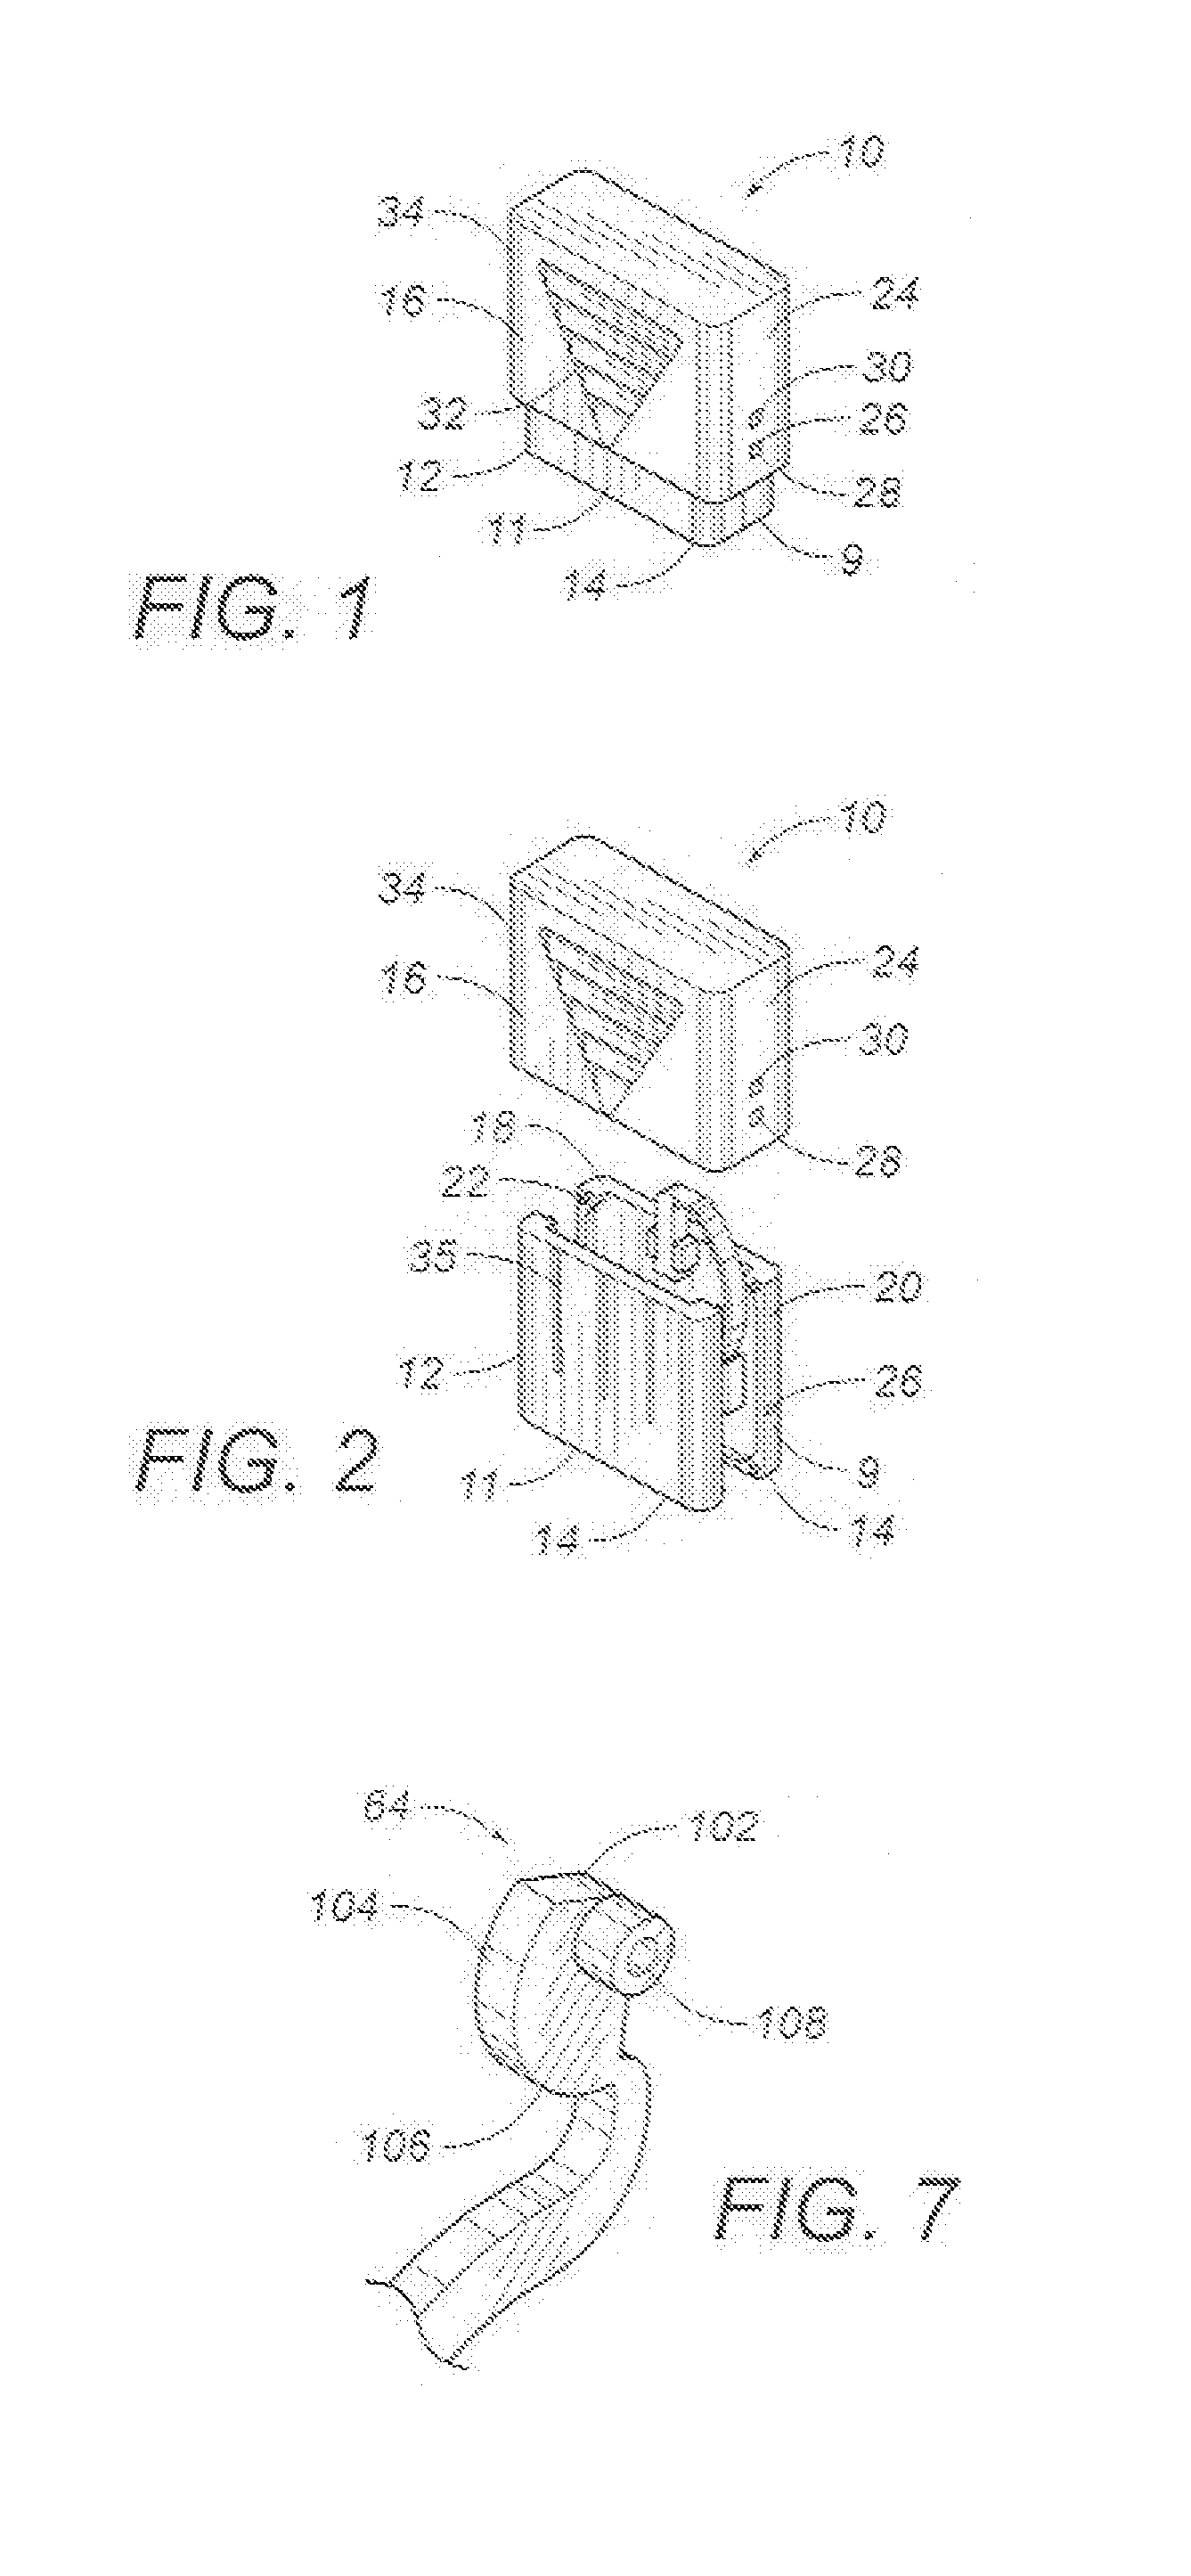 Load-controlled device for a patterned skin incision